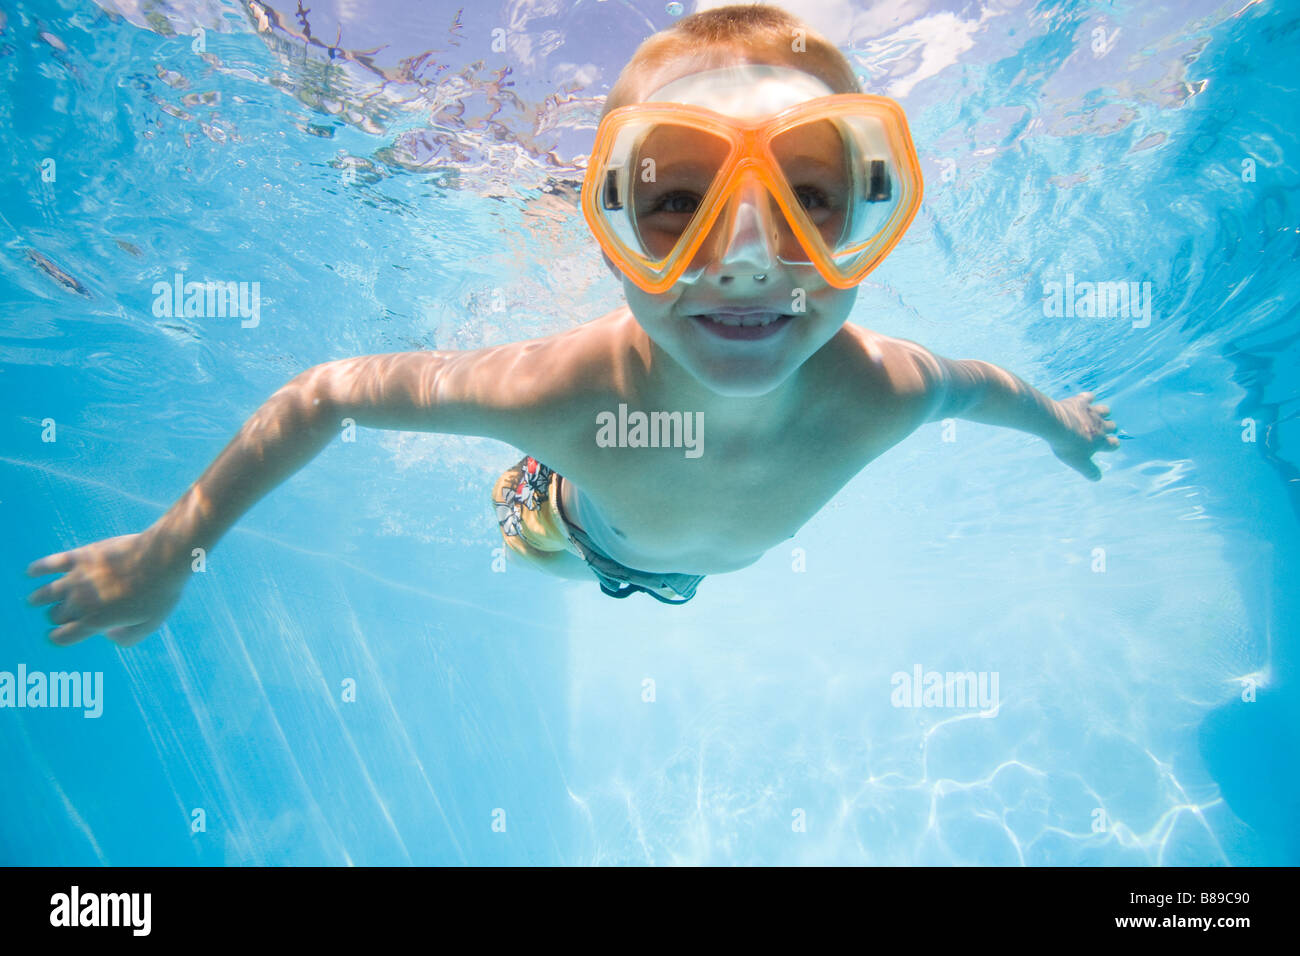 Boy swimming underwater Banque D'Images